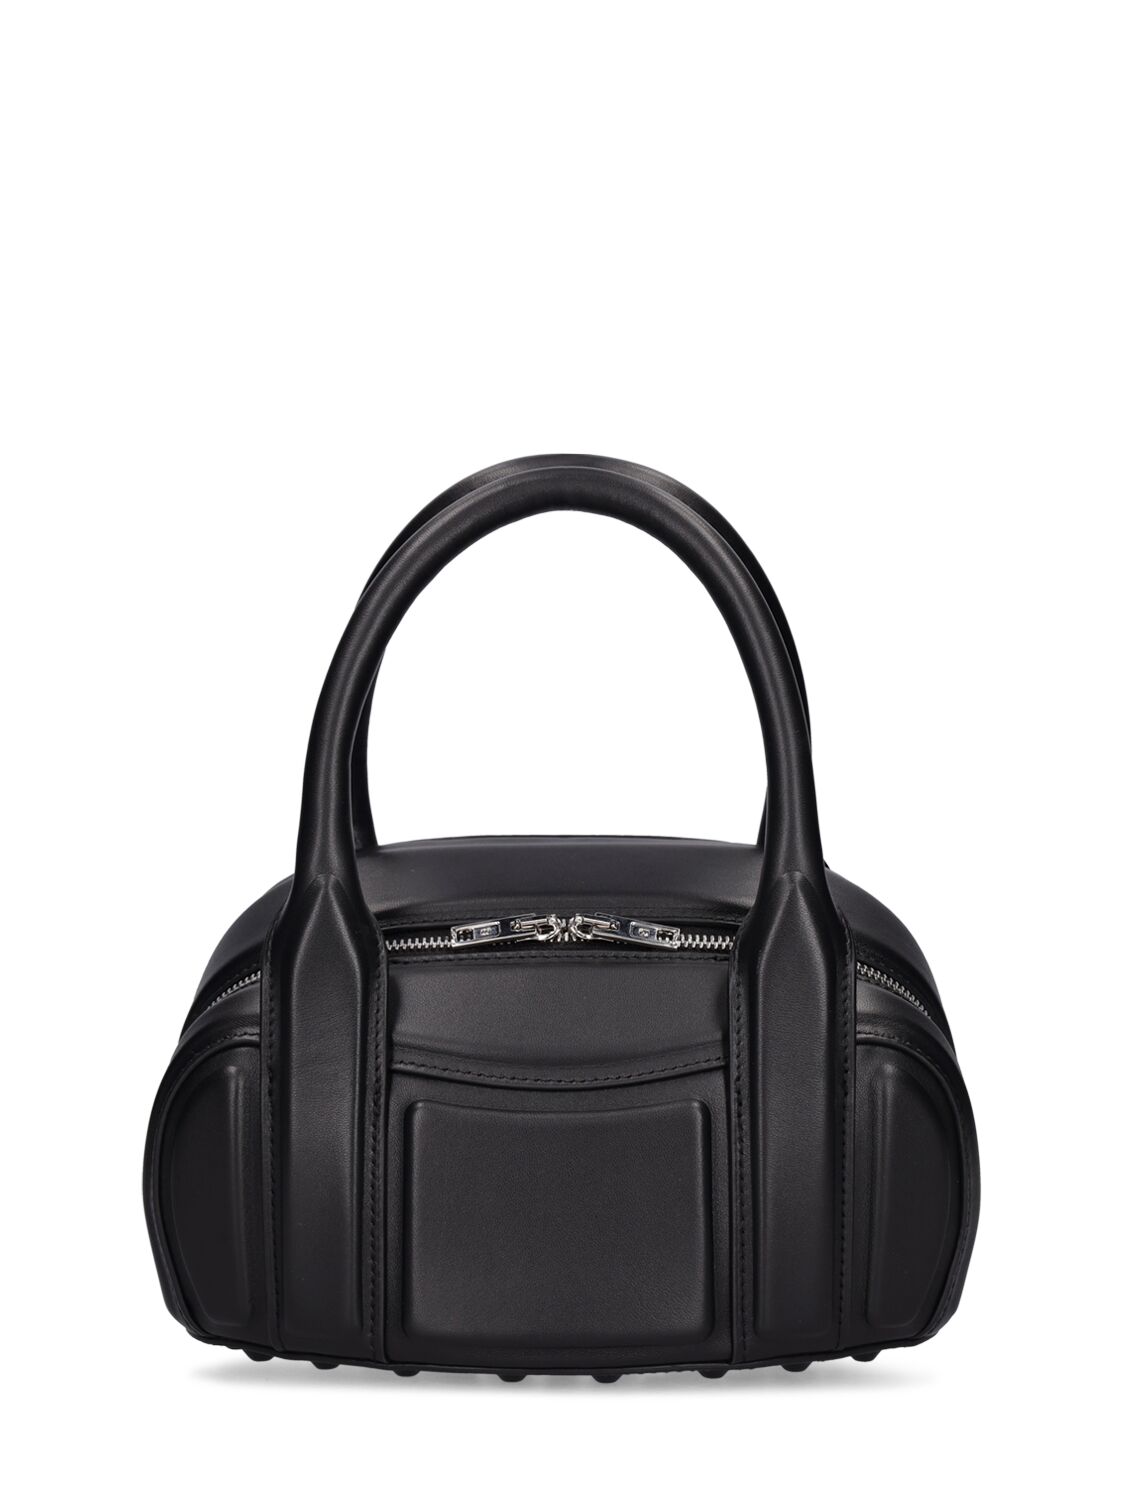 Alexander Wang Small Roc Leather Top Handle Bag In Black